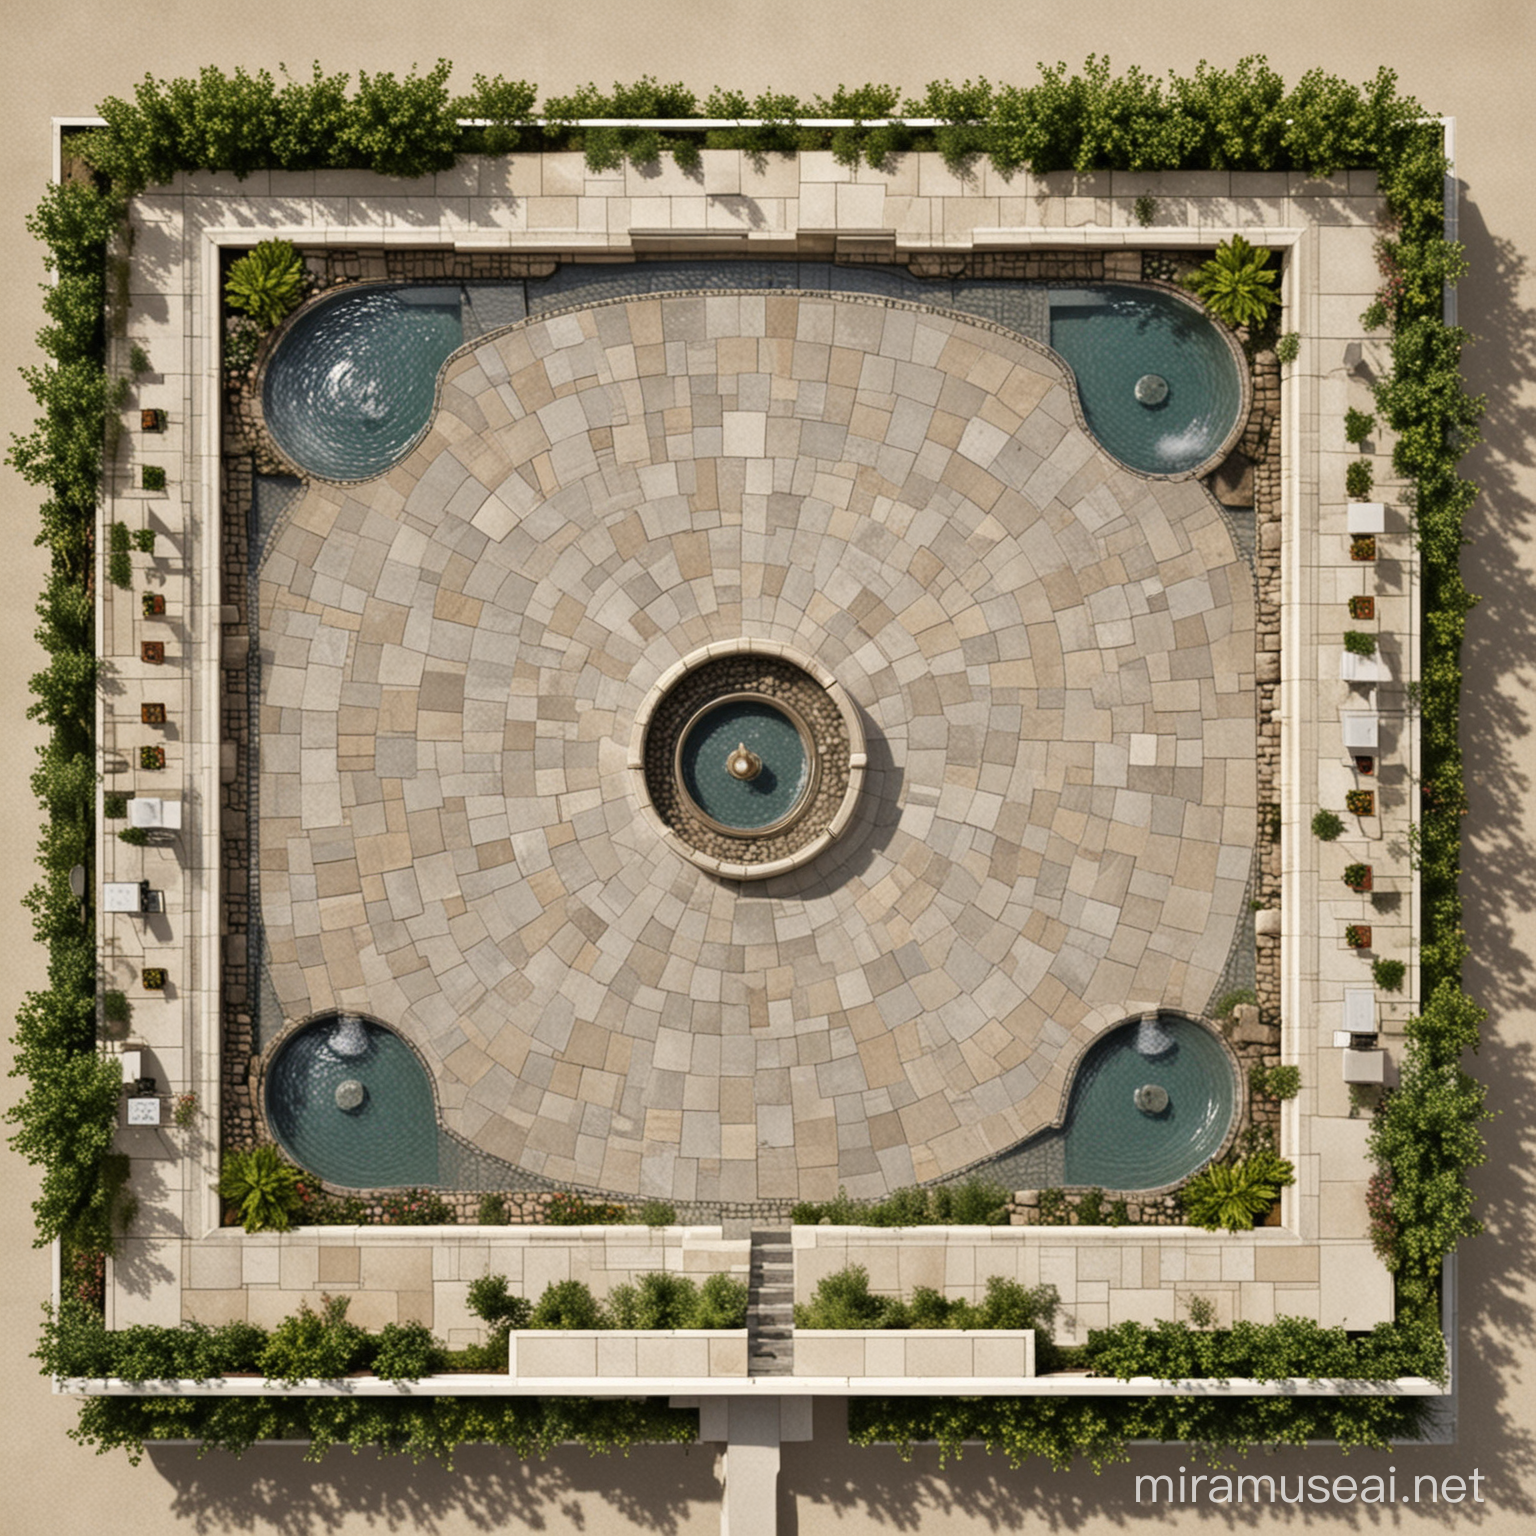 Asymmetric Leisure Square Plan Design with Central Fountain